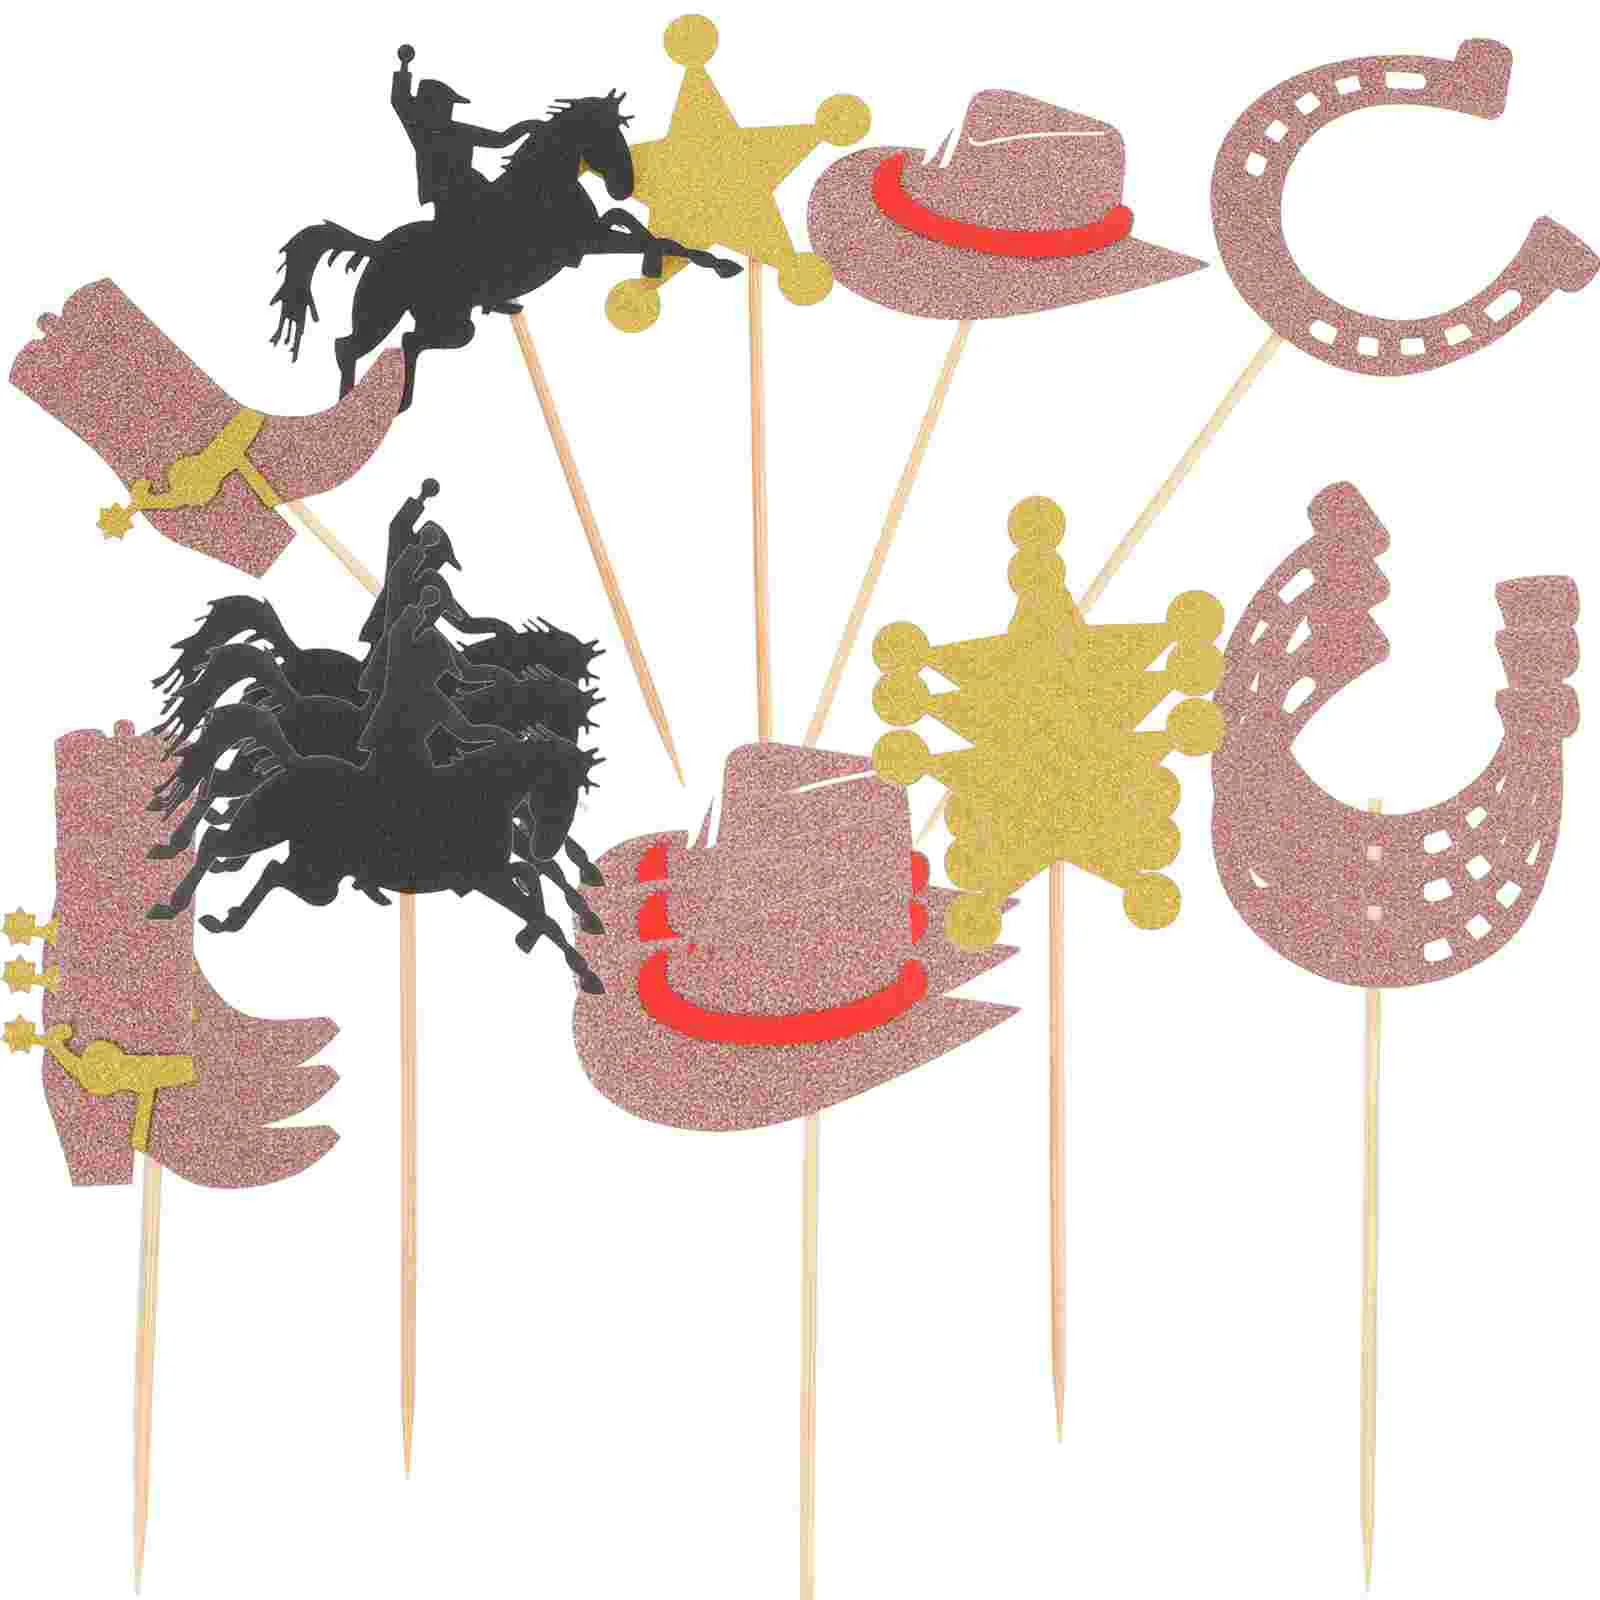 

30 Pcs Graduation Cake Inserts Birthday Cupcake Topper Cowboy Decorations Western Party Toppers Paper Festival Pick